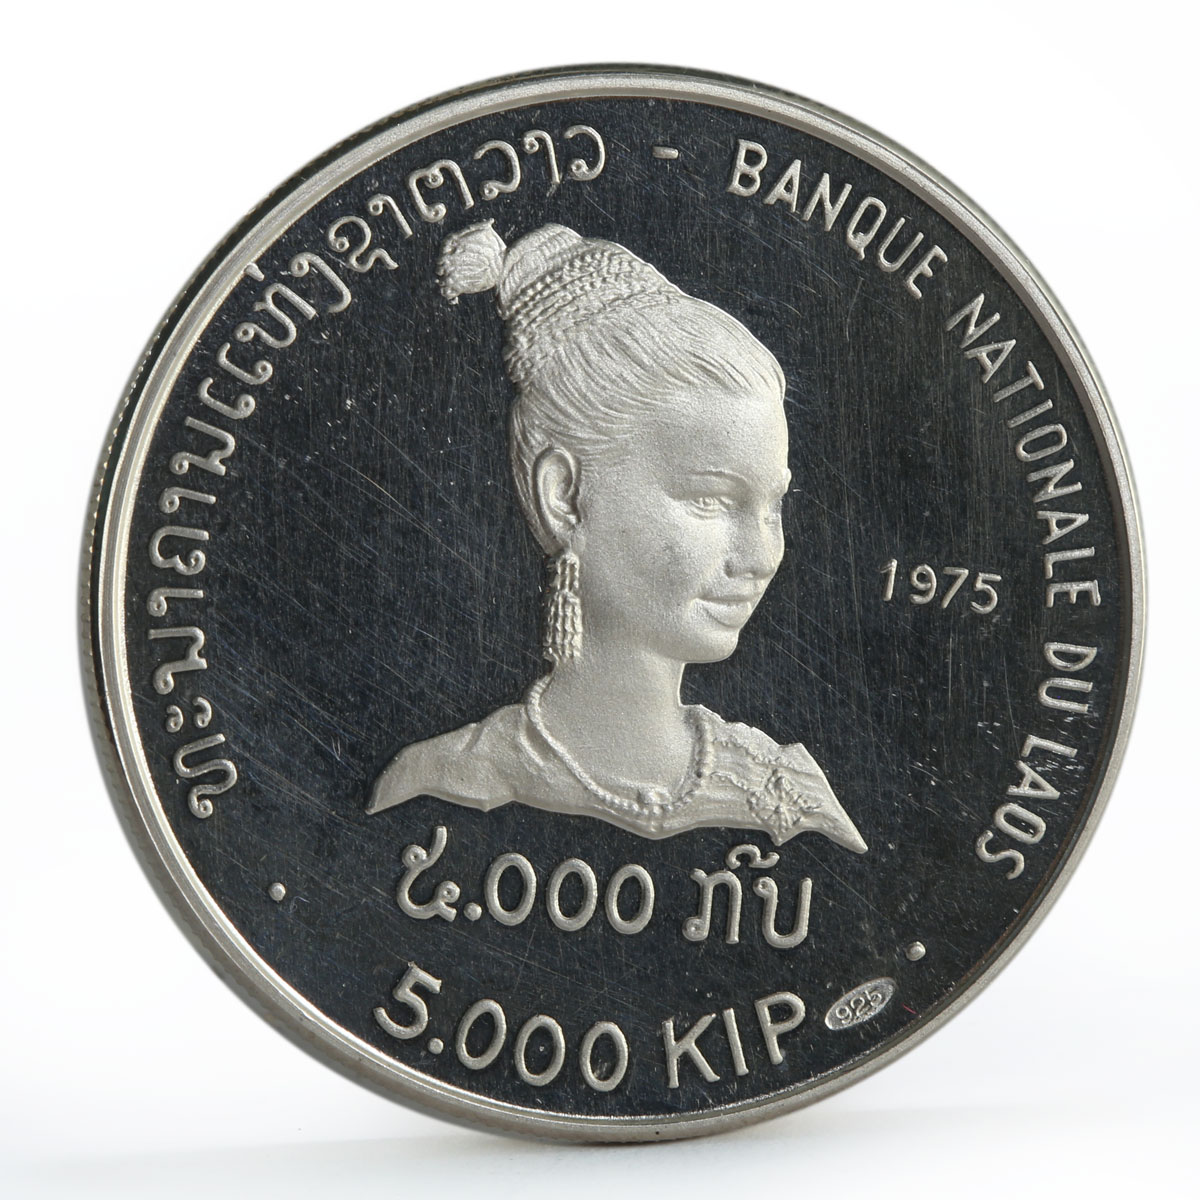 Laos 5000 kip Laotion Maiden proof silver coin 1975